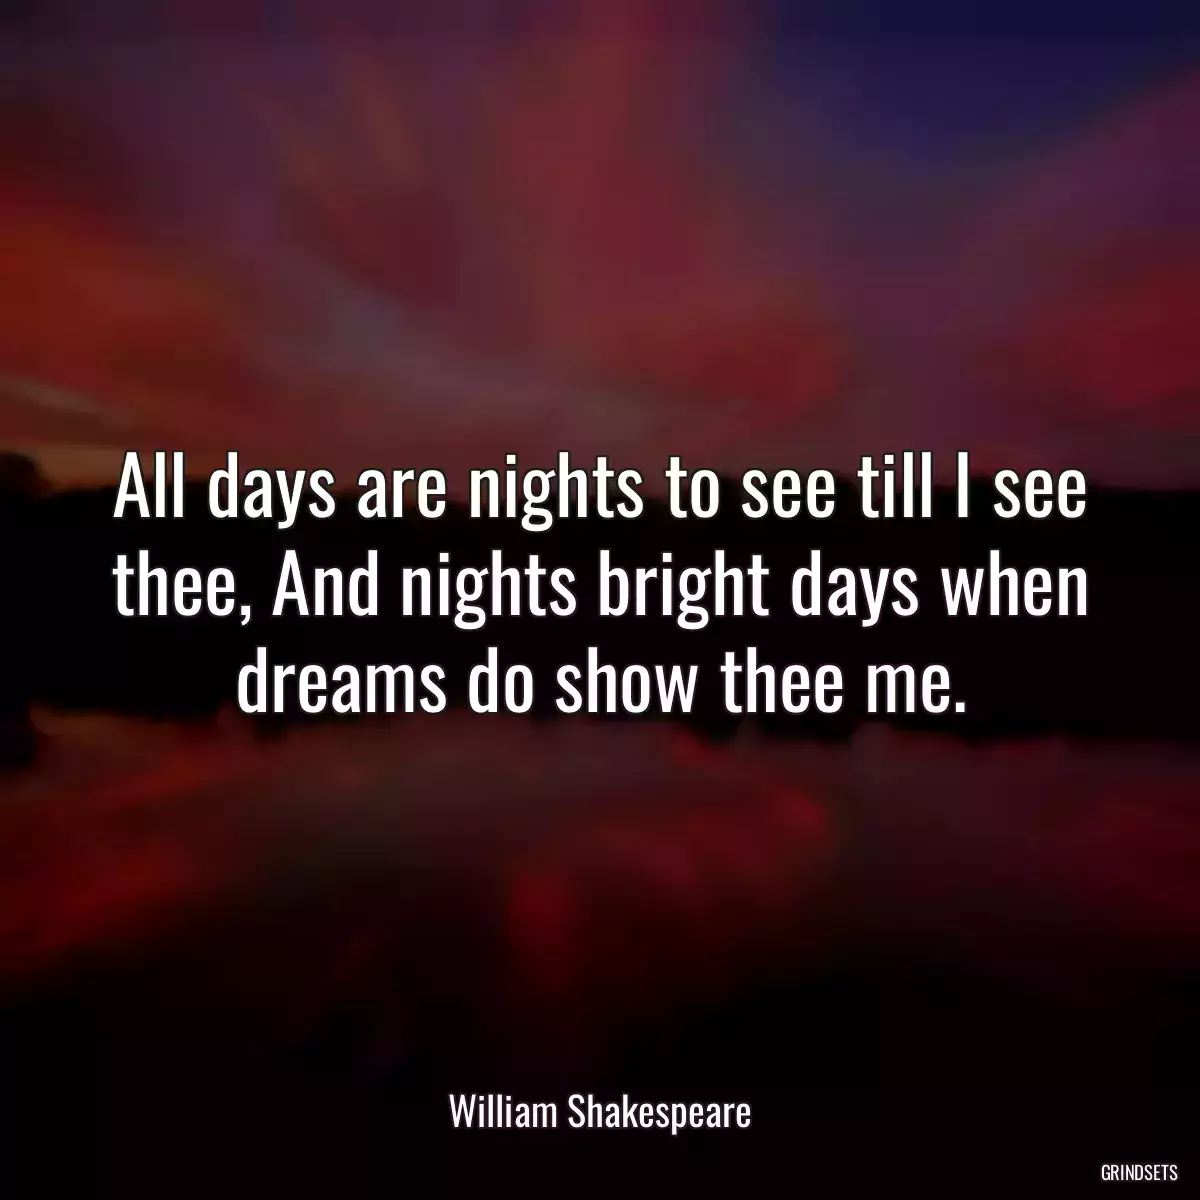 All days are nights to see till I see thee, And nights bright days when dreams do show thee me.